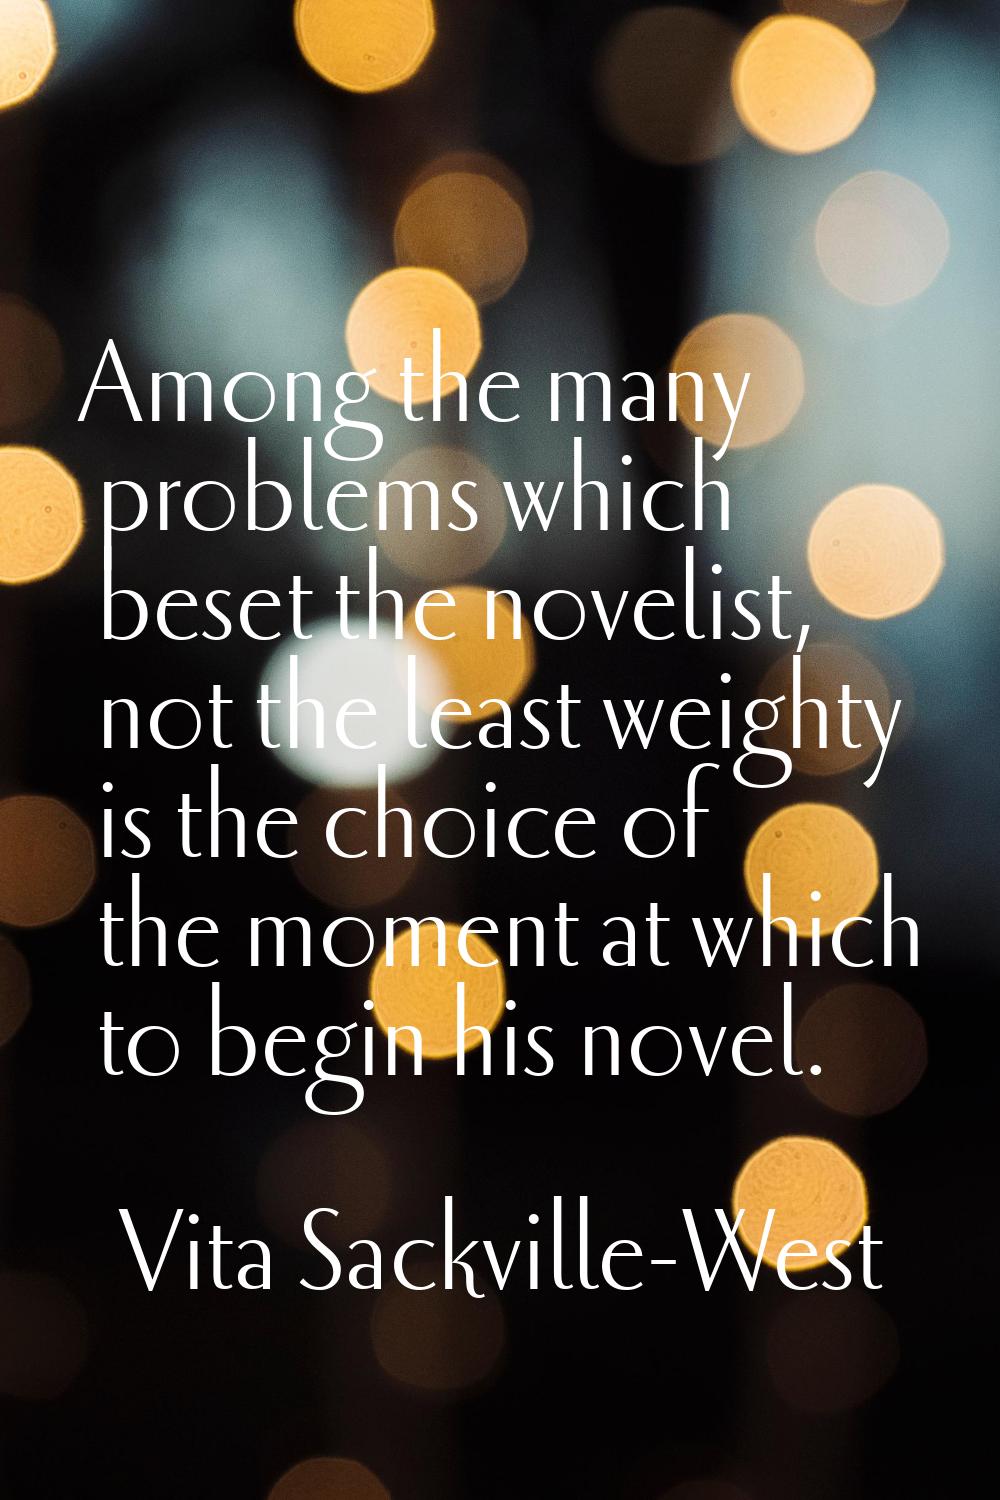 Among the many problems which beset the novelist, not the least weighty is the choice of the moment